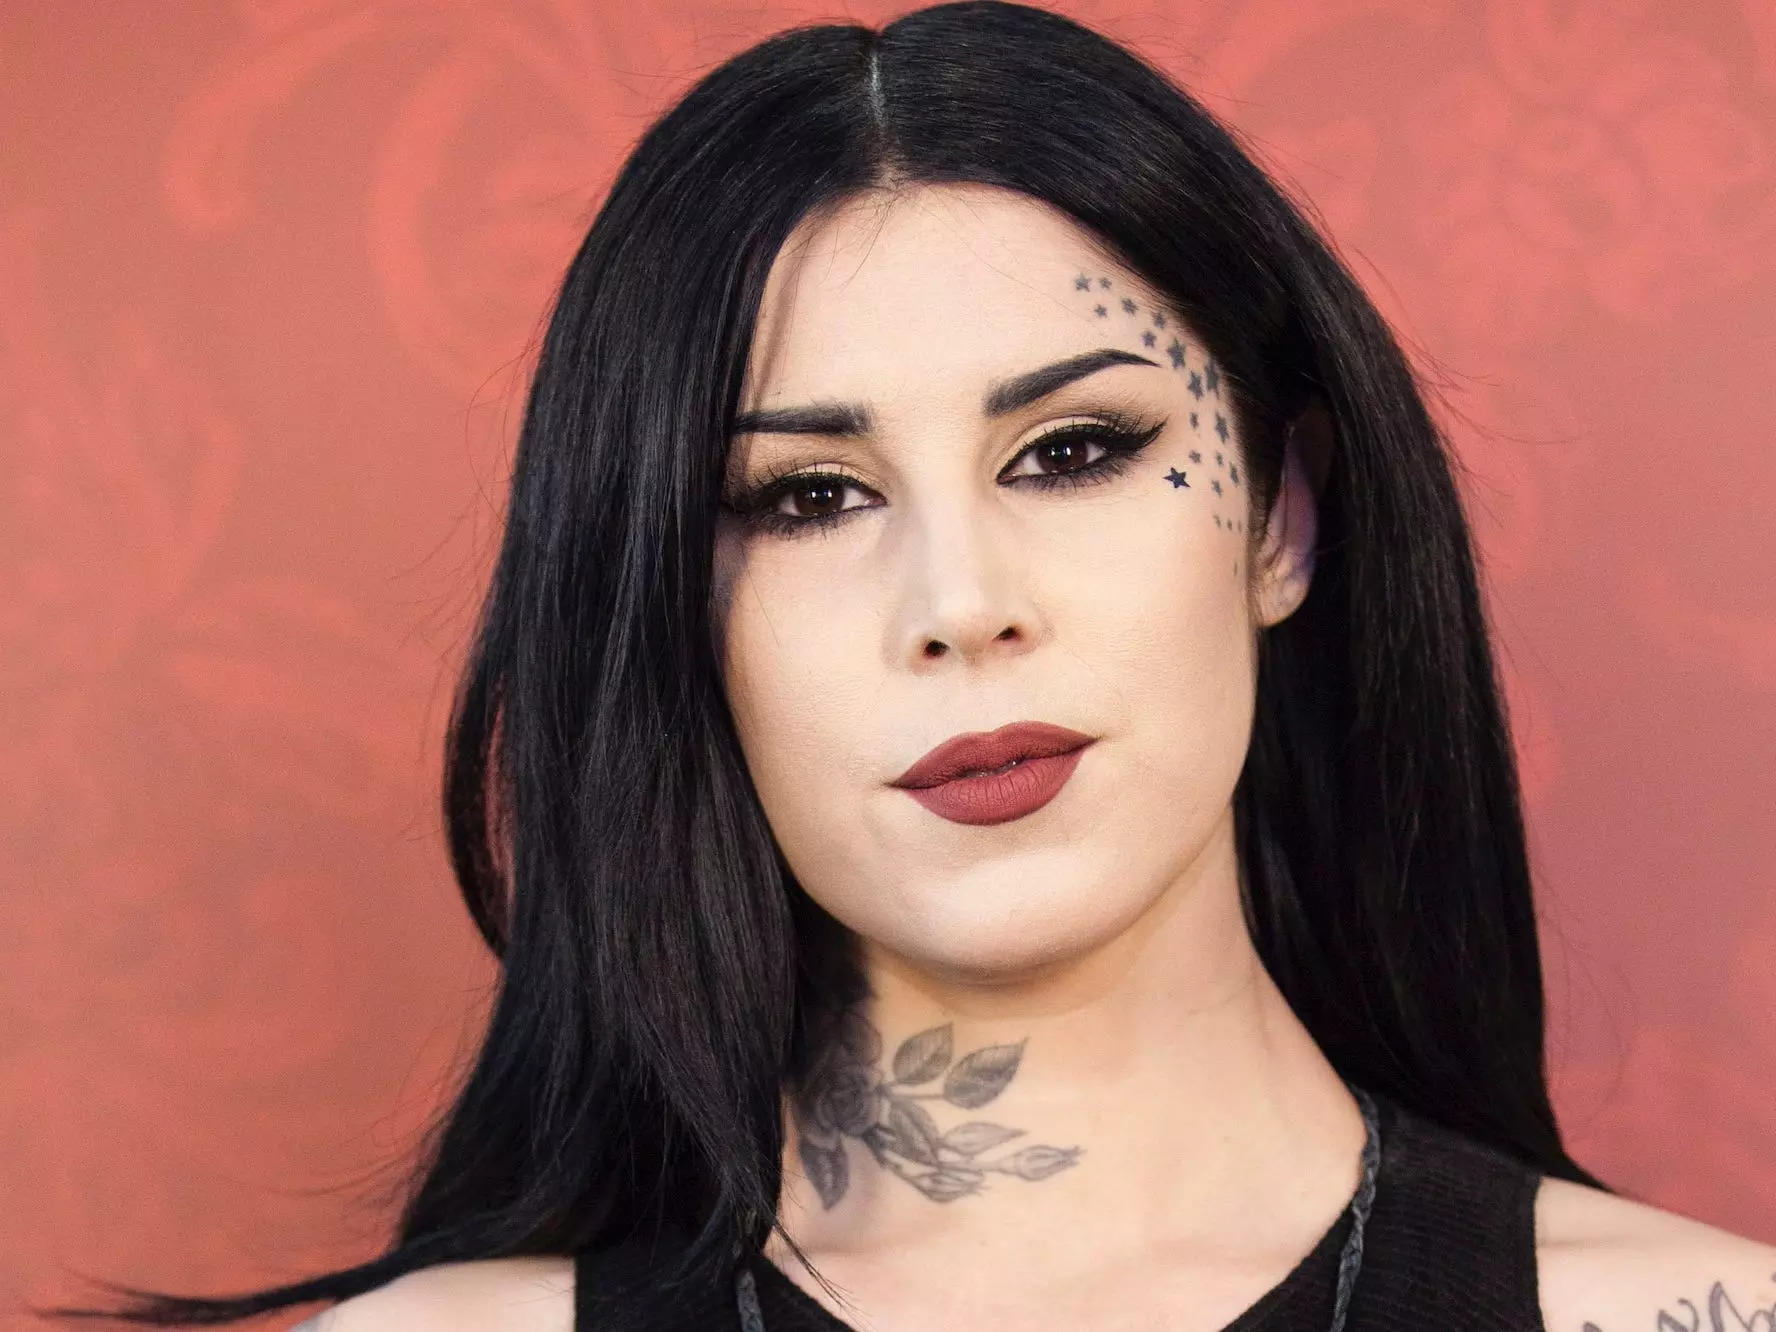 Kat Von D is selling her California home and moving to Indiana permanently....